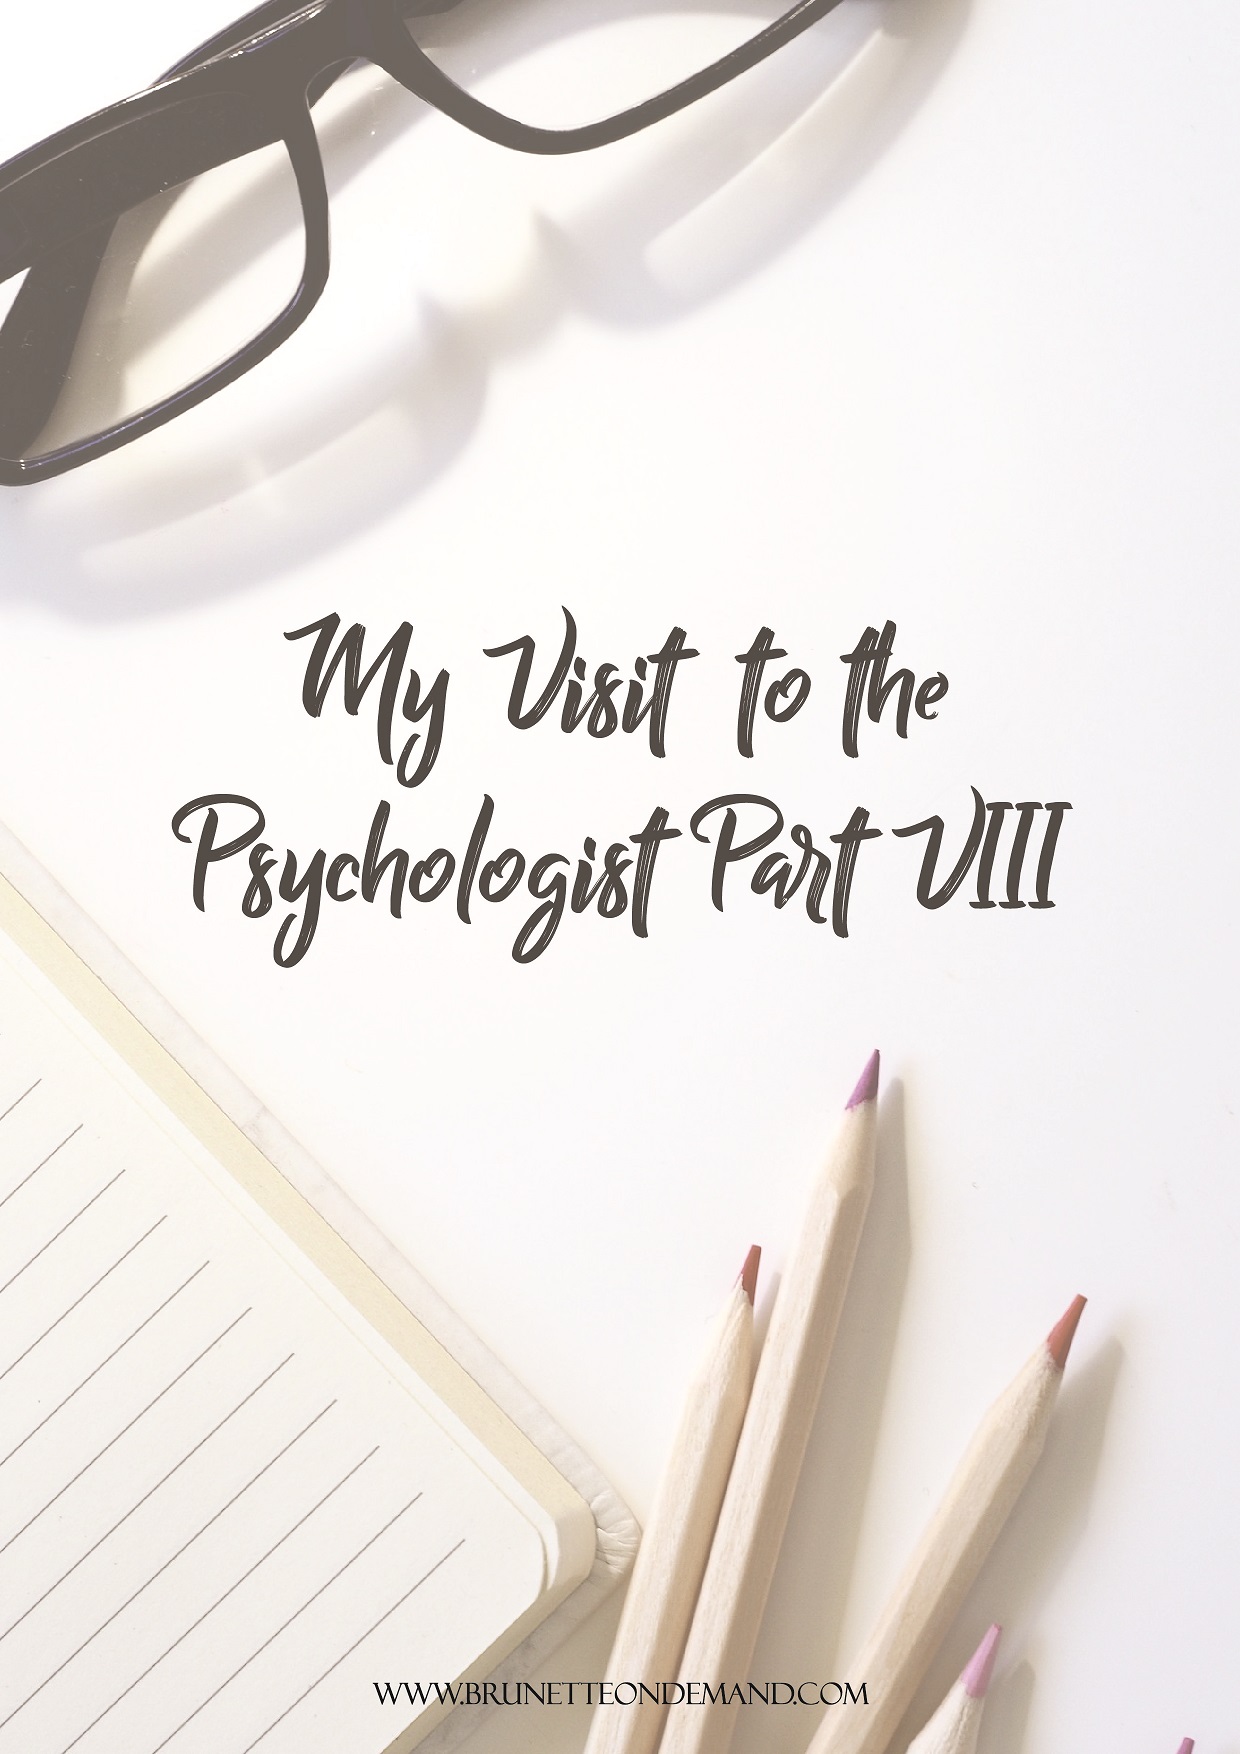 My Visit To The Psychologist Part VIII